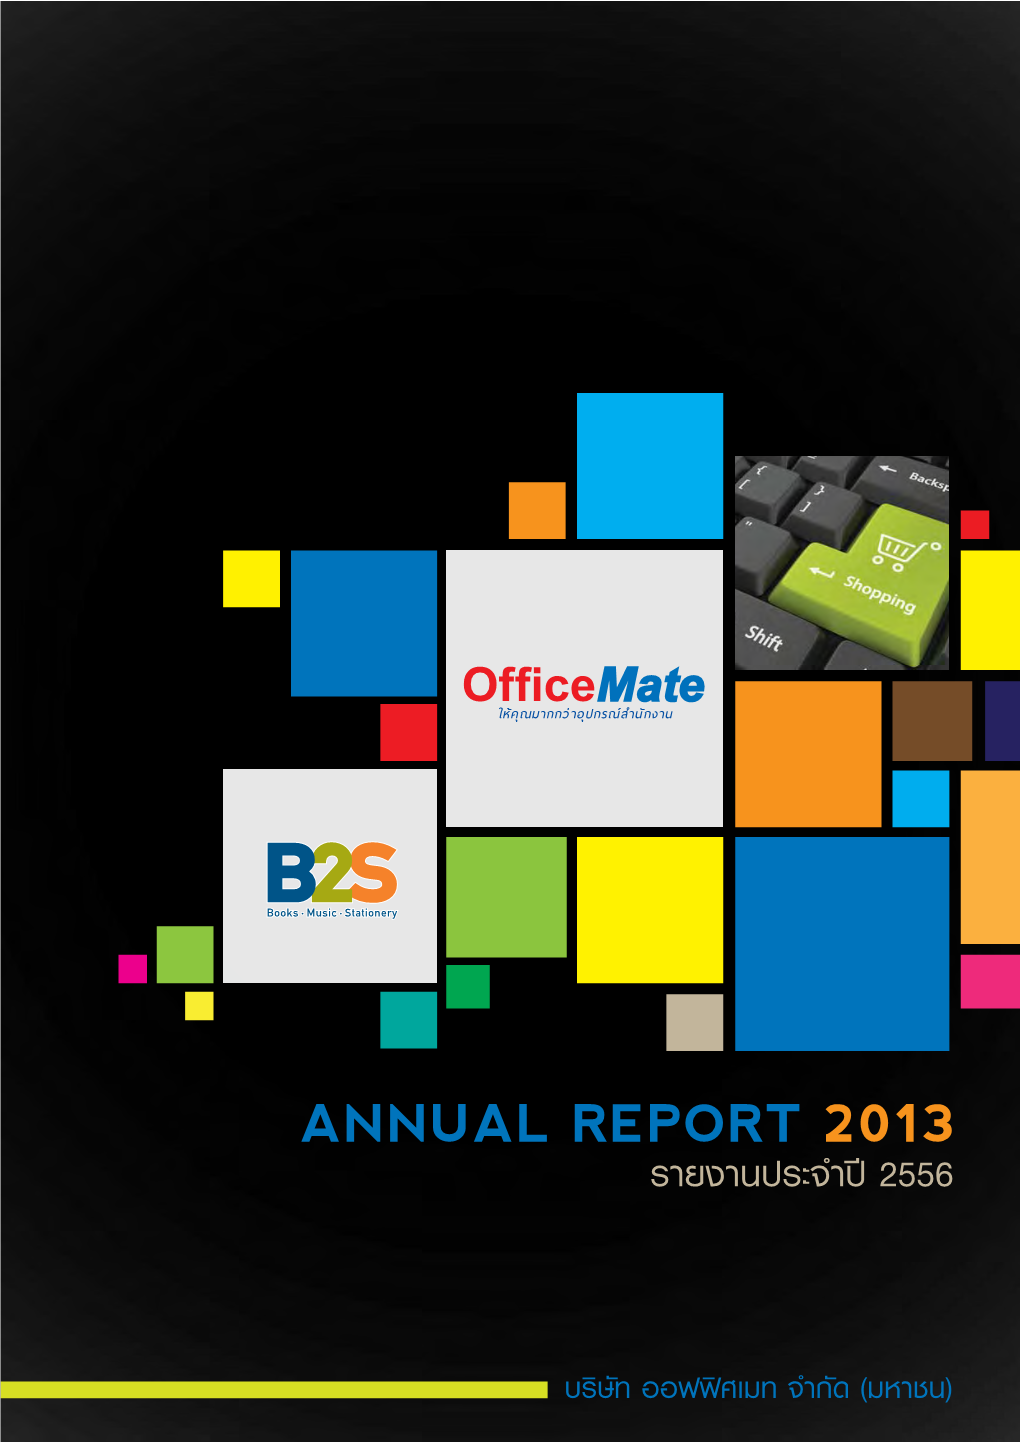 OFM: Officemate Public Company Limited | Annual Report 2013